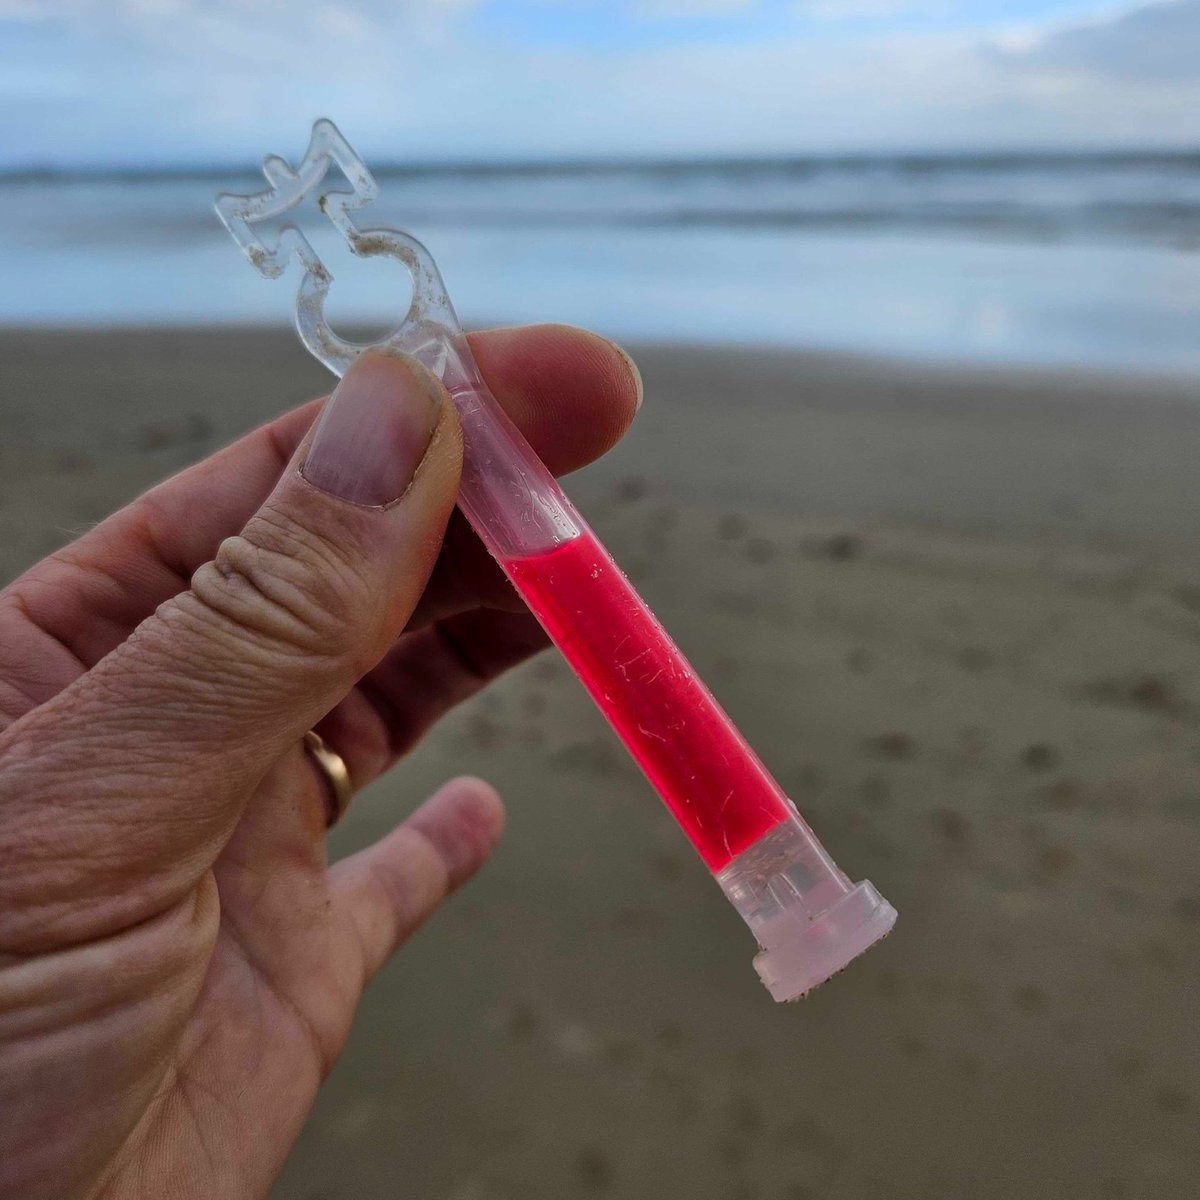 #Chemicallightsticks are used for a variety of purposes, including in the commercial fishing industry to attract target fish. Volunteers from Coolum & North Shore Coast Care have picked up hundreds of these while monitoring turtle nesting beaches on the Sunshine Coast.